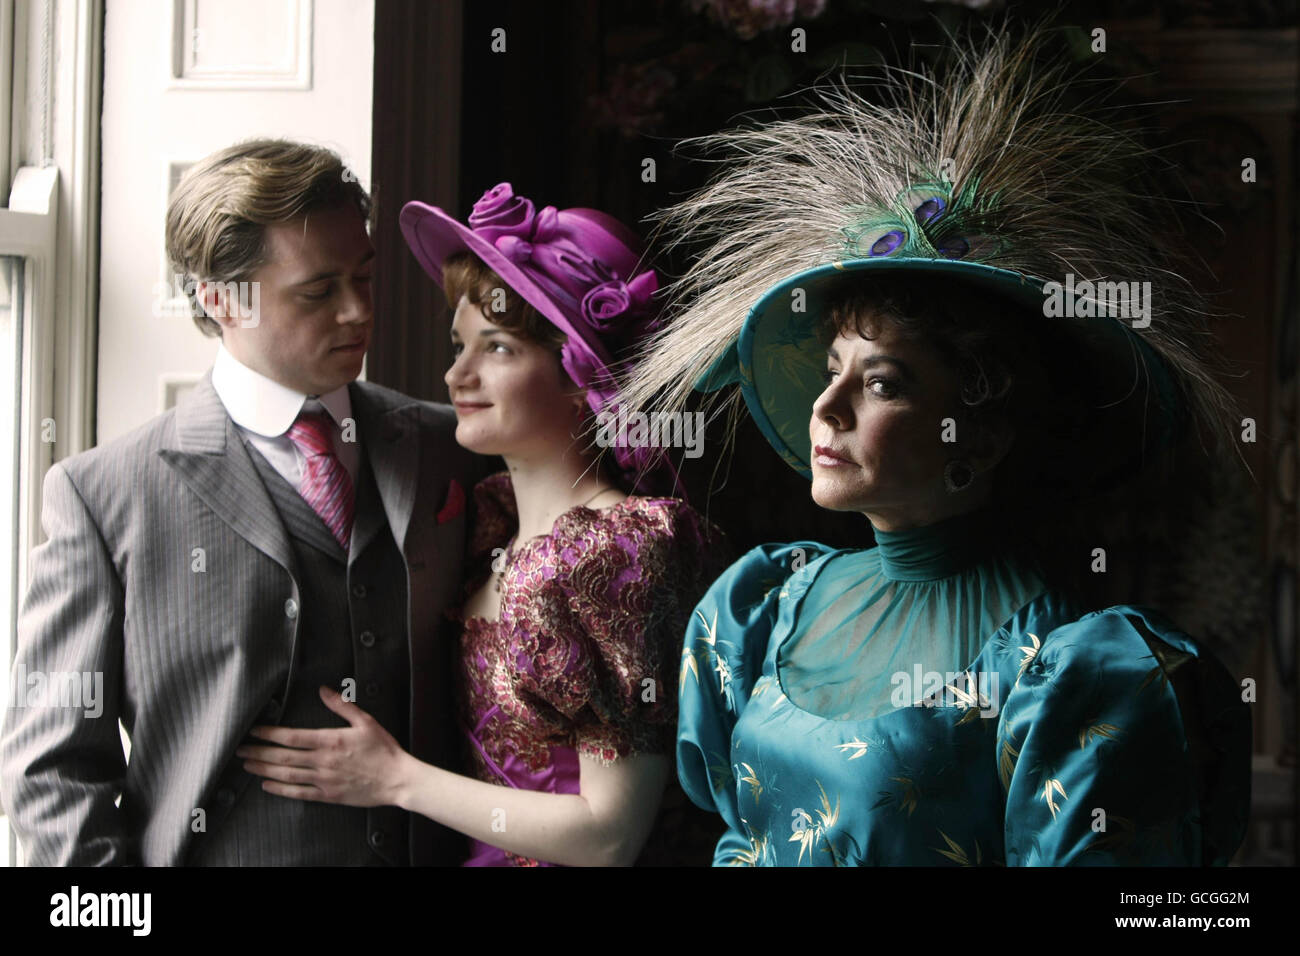 (left to right) Rory Keenan, Aoife Duffin with fellow cast member, West Wing star Stockard Channing, right, who will play Lady Bracknell in Rough Magic's production of The Importance of Being Earnest, during a photocall in Dublin, ahead of it's opening at the Gaiety Theatre and which runs from June 2-19. Stock Photo